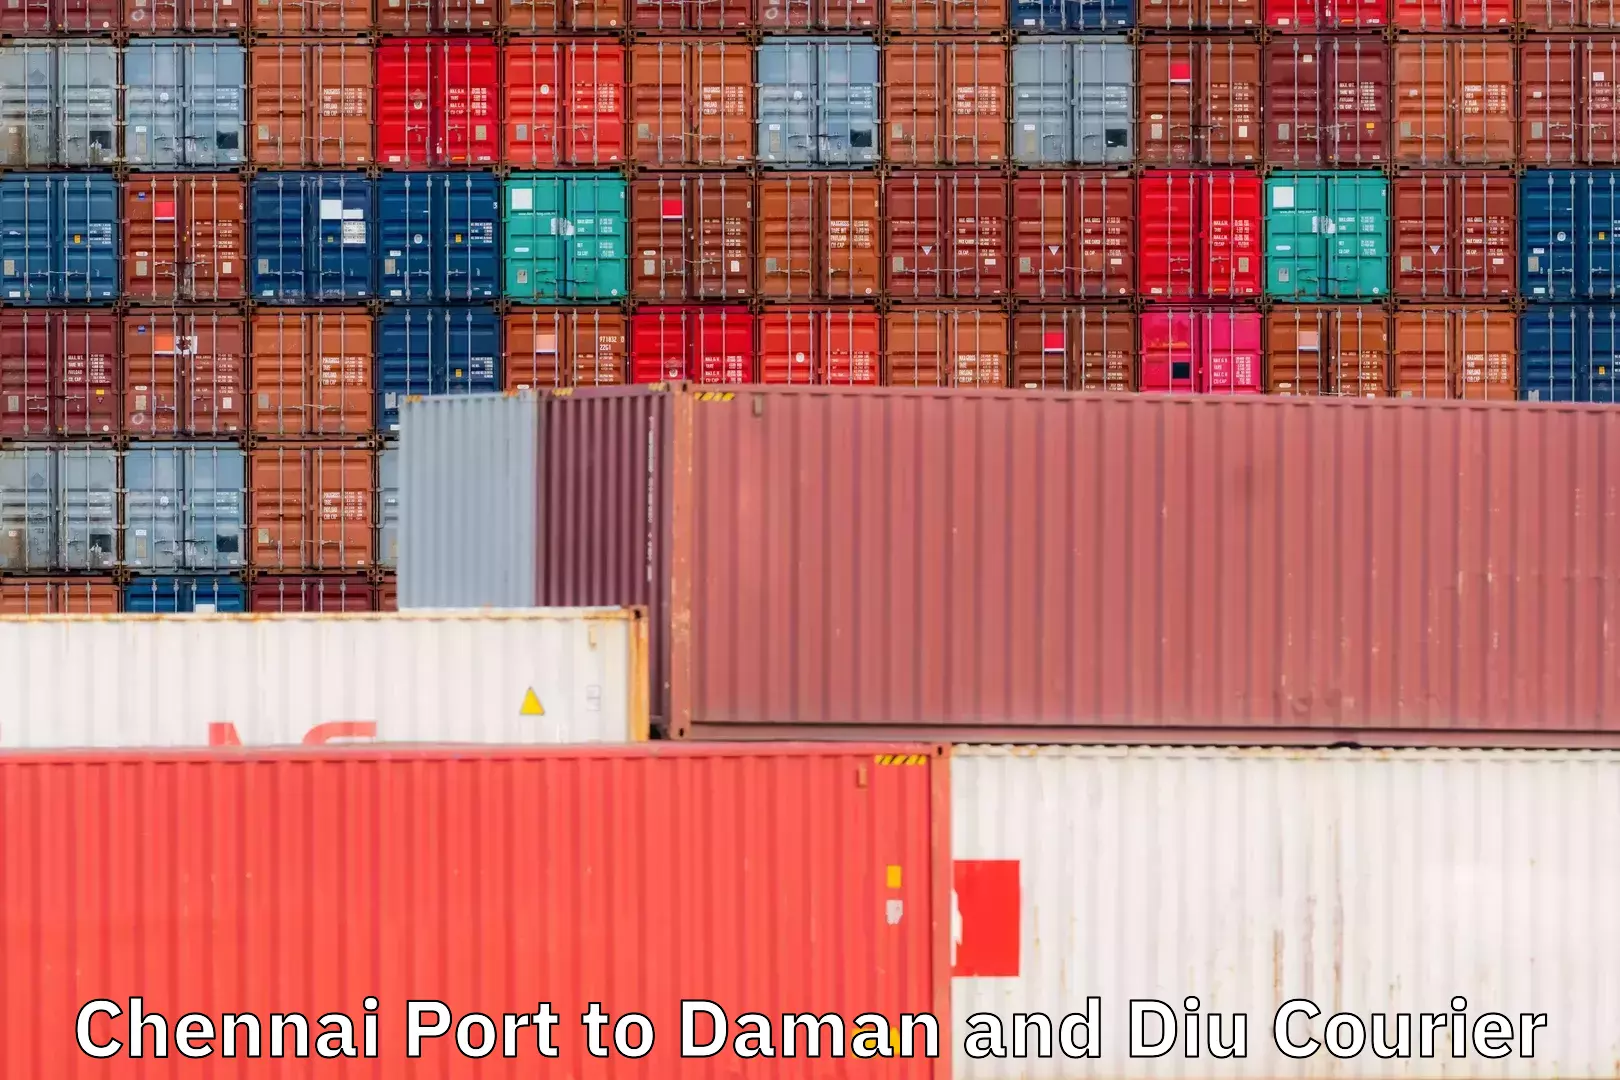 Affordable parcel service Chennai Port to Daman and Diu